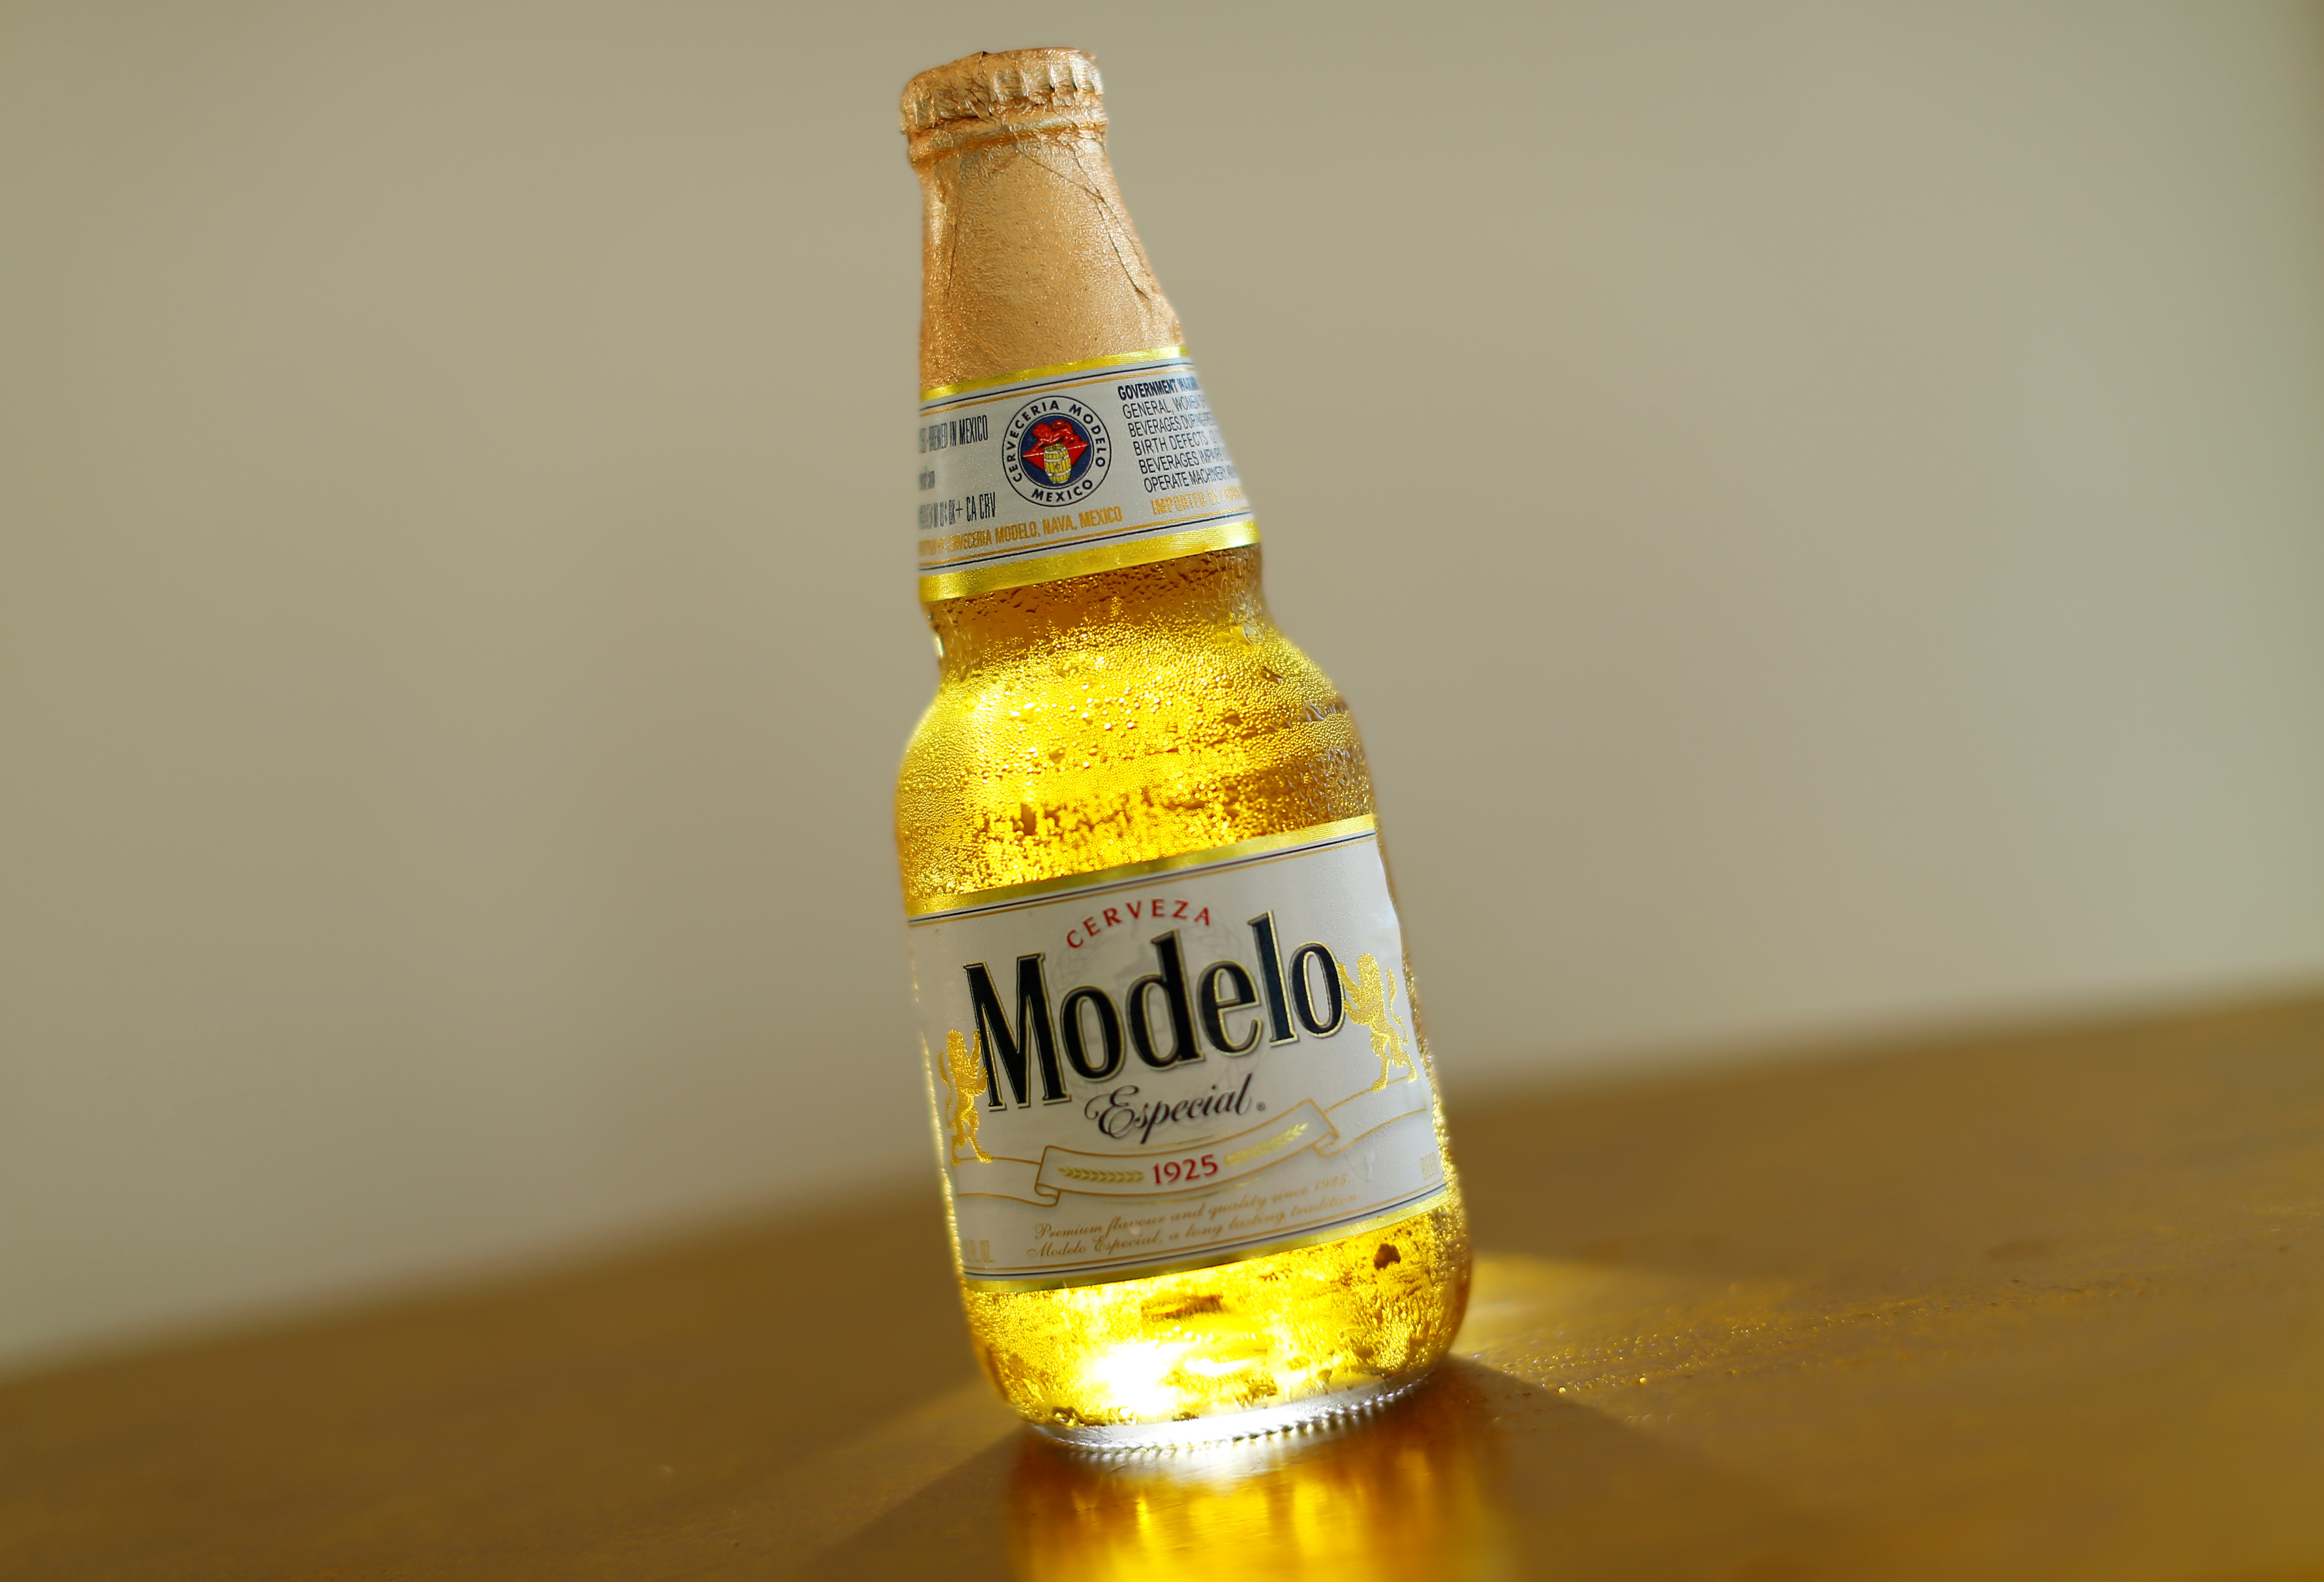 Modelo Especial tops Bud Light as most-sold US beer for second consecutive  month